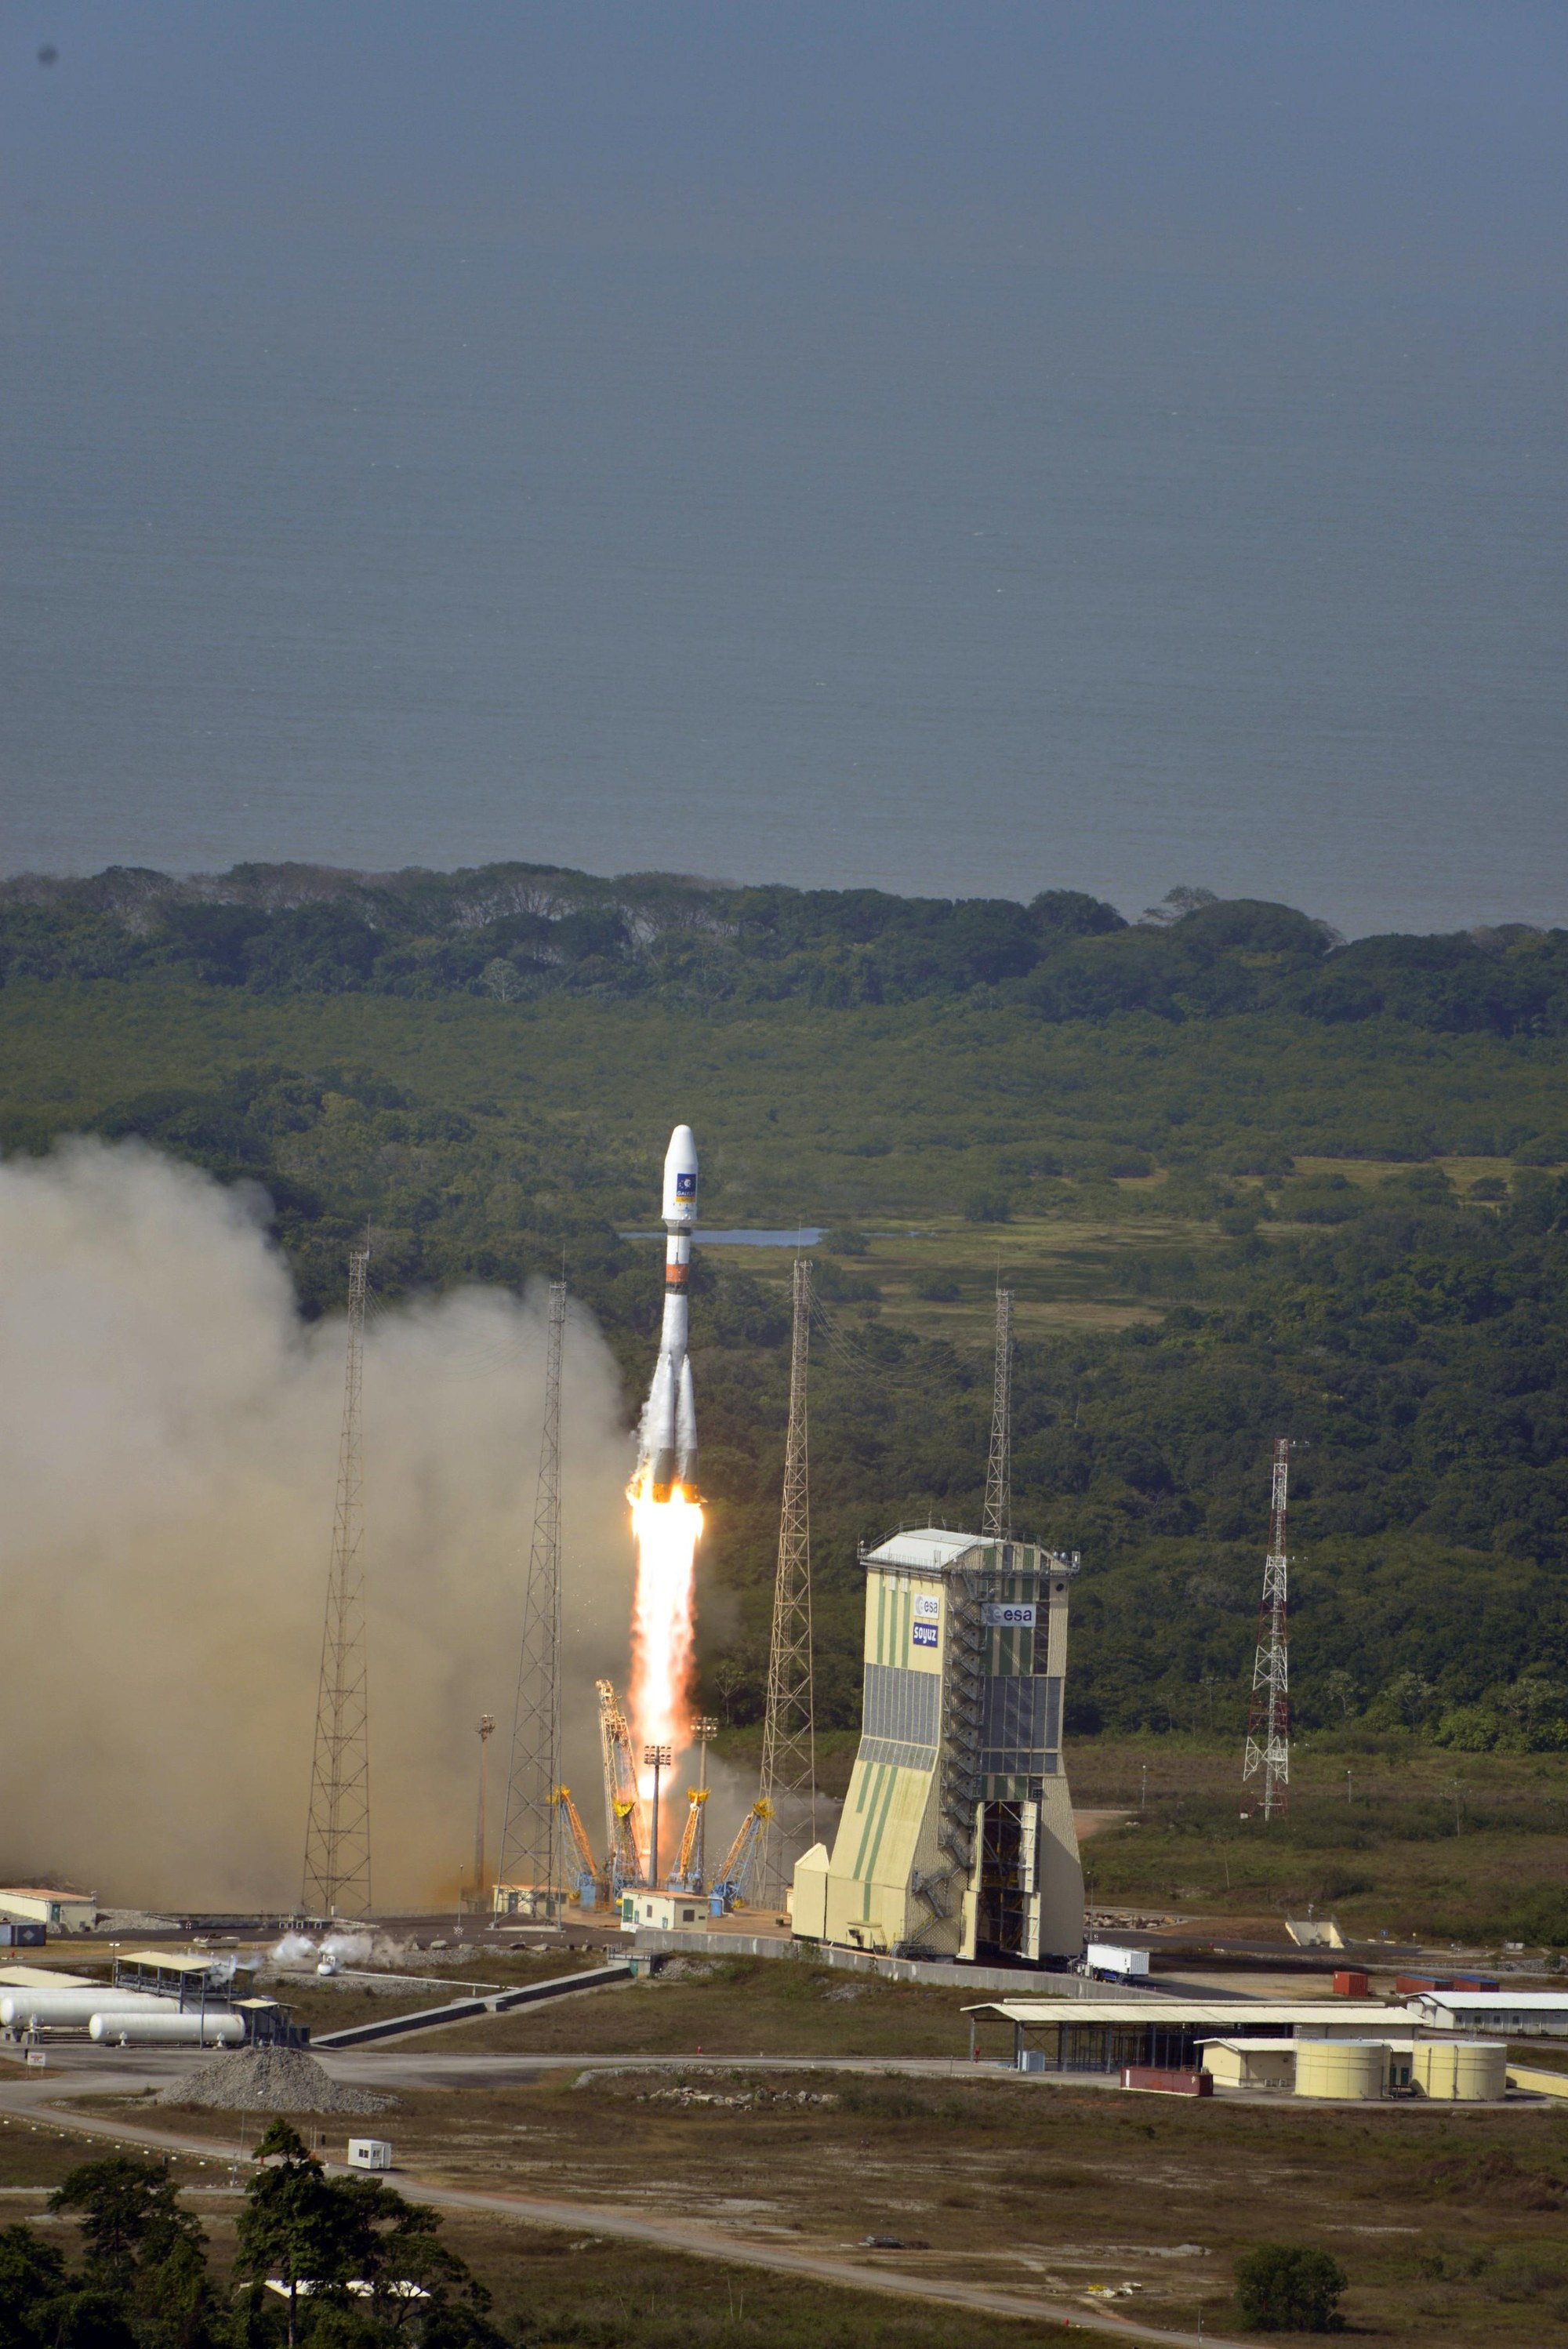 Successful launch of the Soyuz rocket from Europe's Spaceport in French Guiana